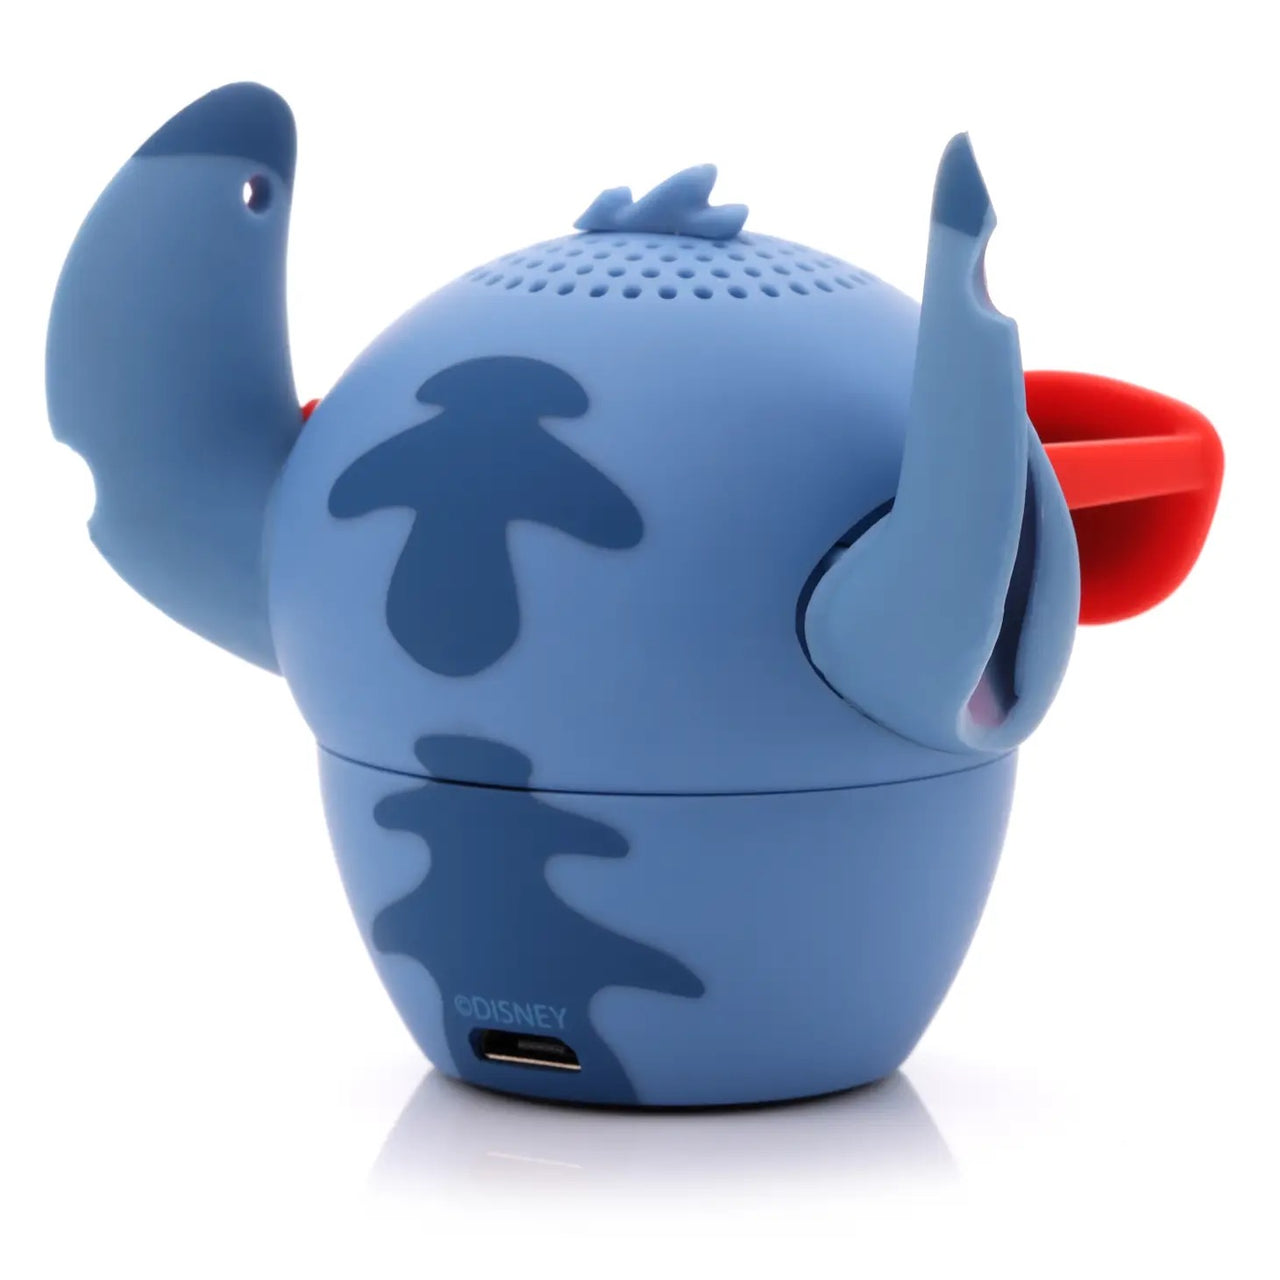 Sunglass Stitch - Bitty Boomers Collectable Bluetooth Speaker